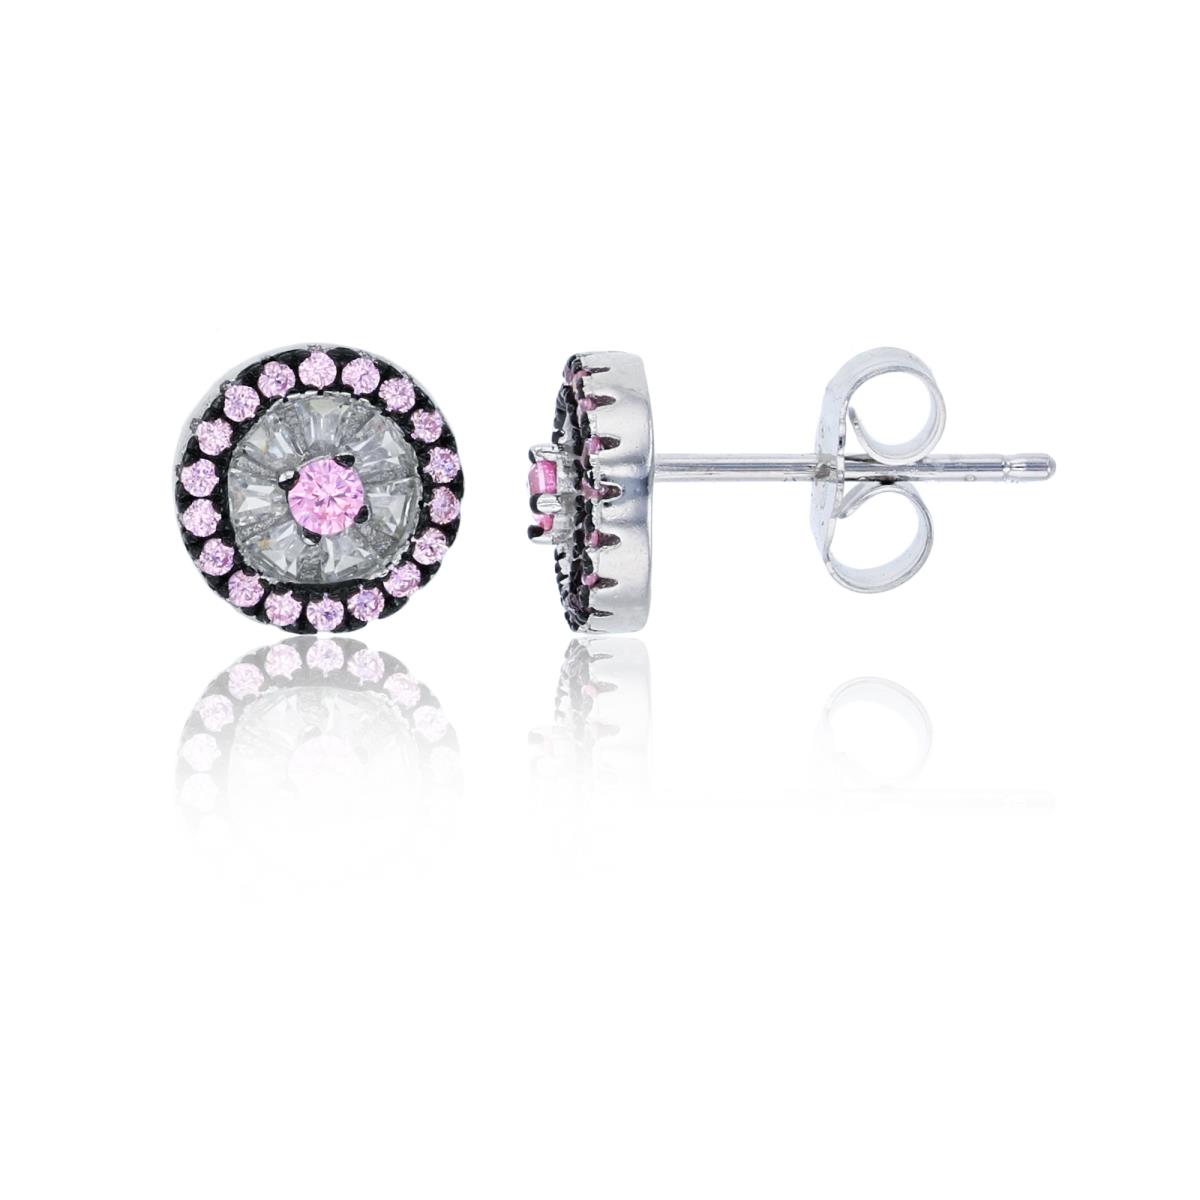 Sterling Silver Black & White Micropave Pink Round & White Baguette Wheel Stud Earring